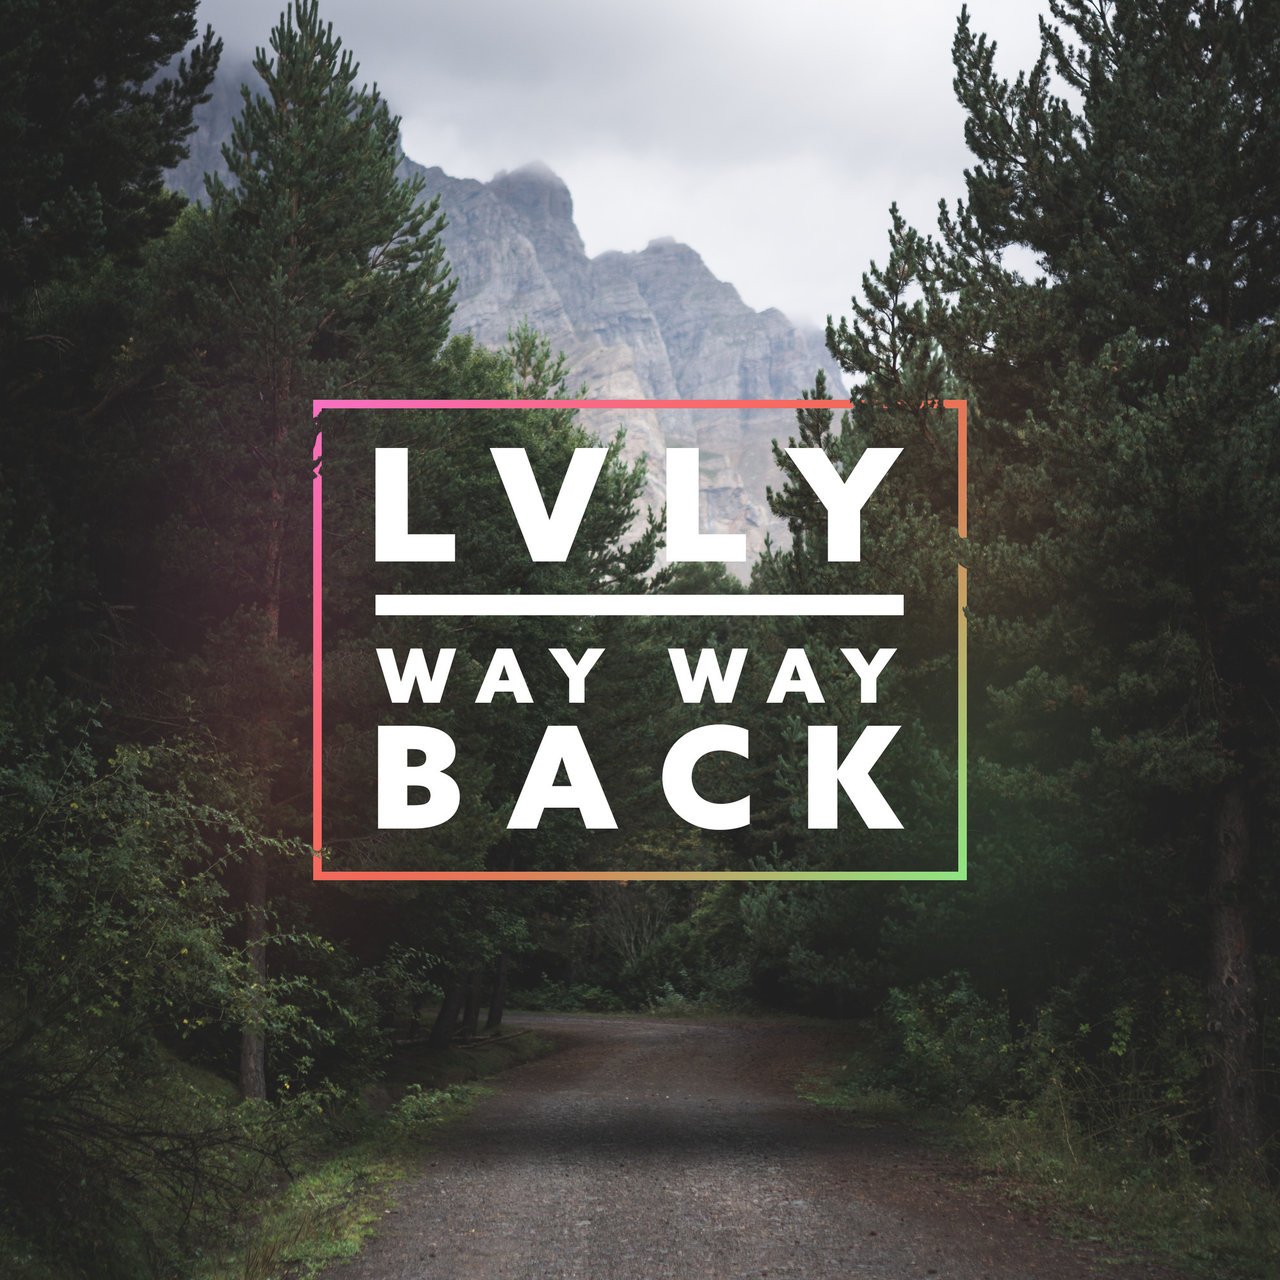 Way back when. Lvly певица. Red Lights Lvly. The way way back. Way way back (Acoustic Version) Lvly feat. Megan Wofford.